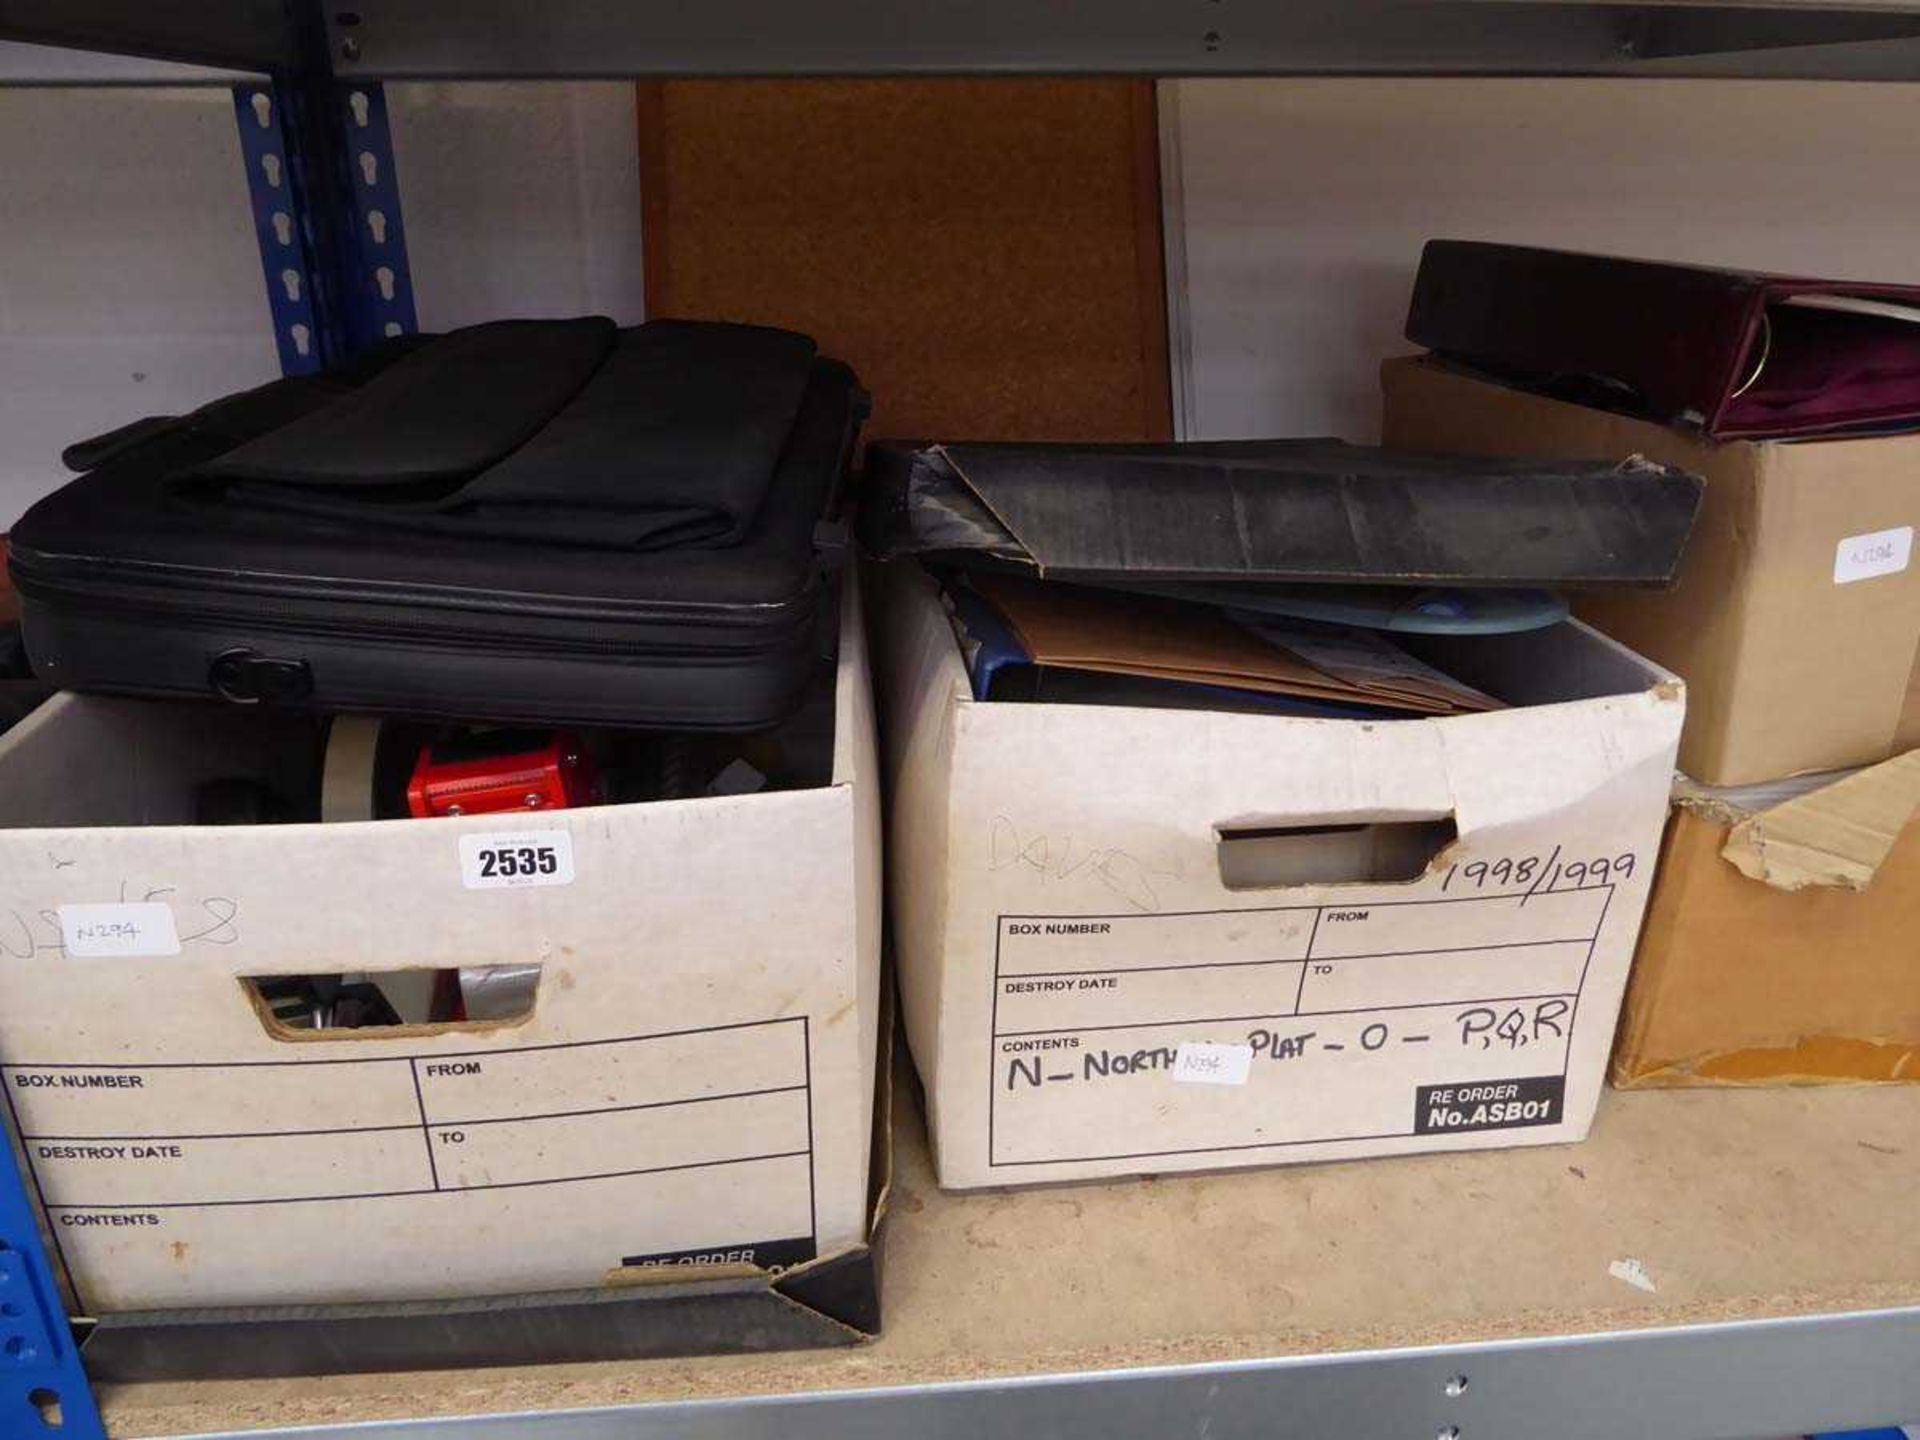 2 shelves containing mixed stationery supplies incl. staplers, hole punchers, tape guns, various - Image 2 of 6